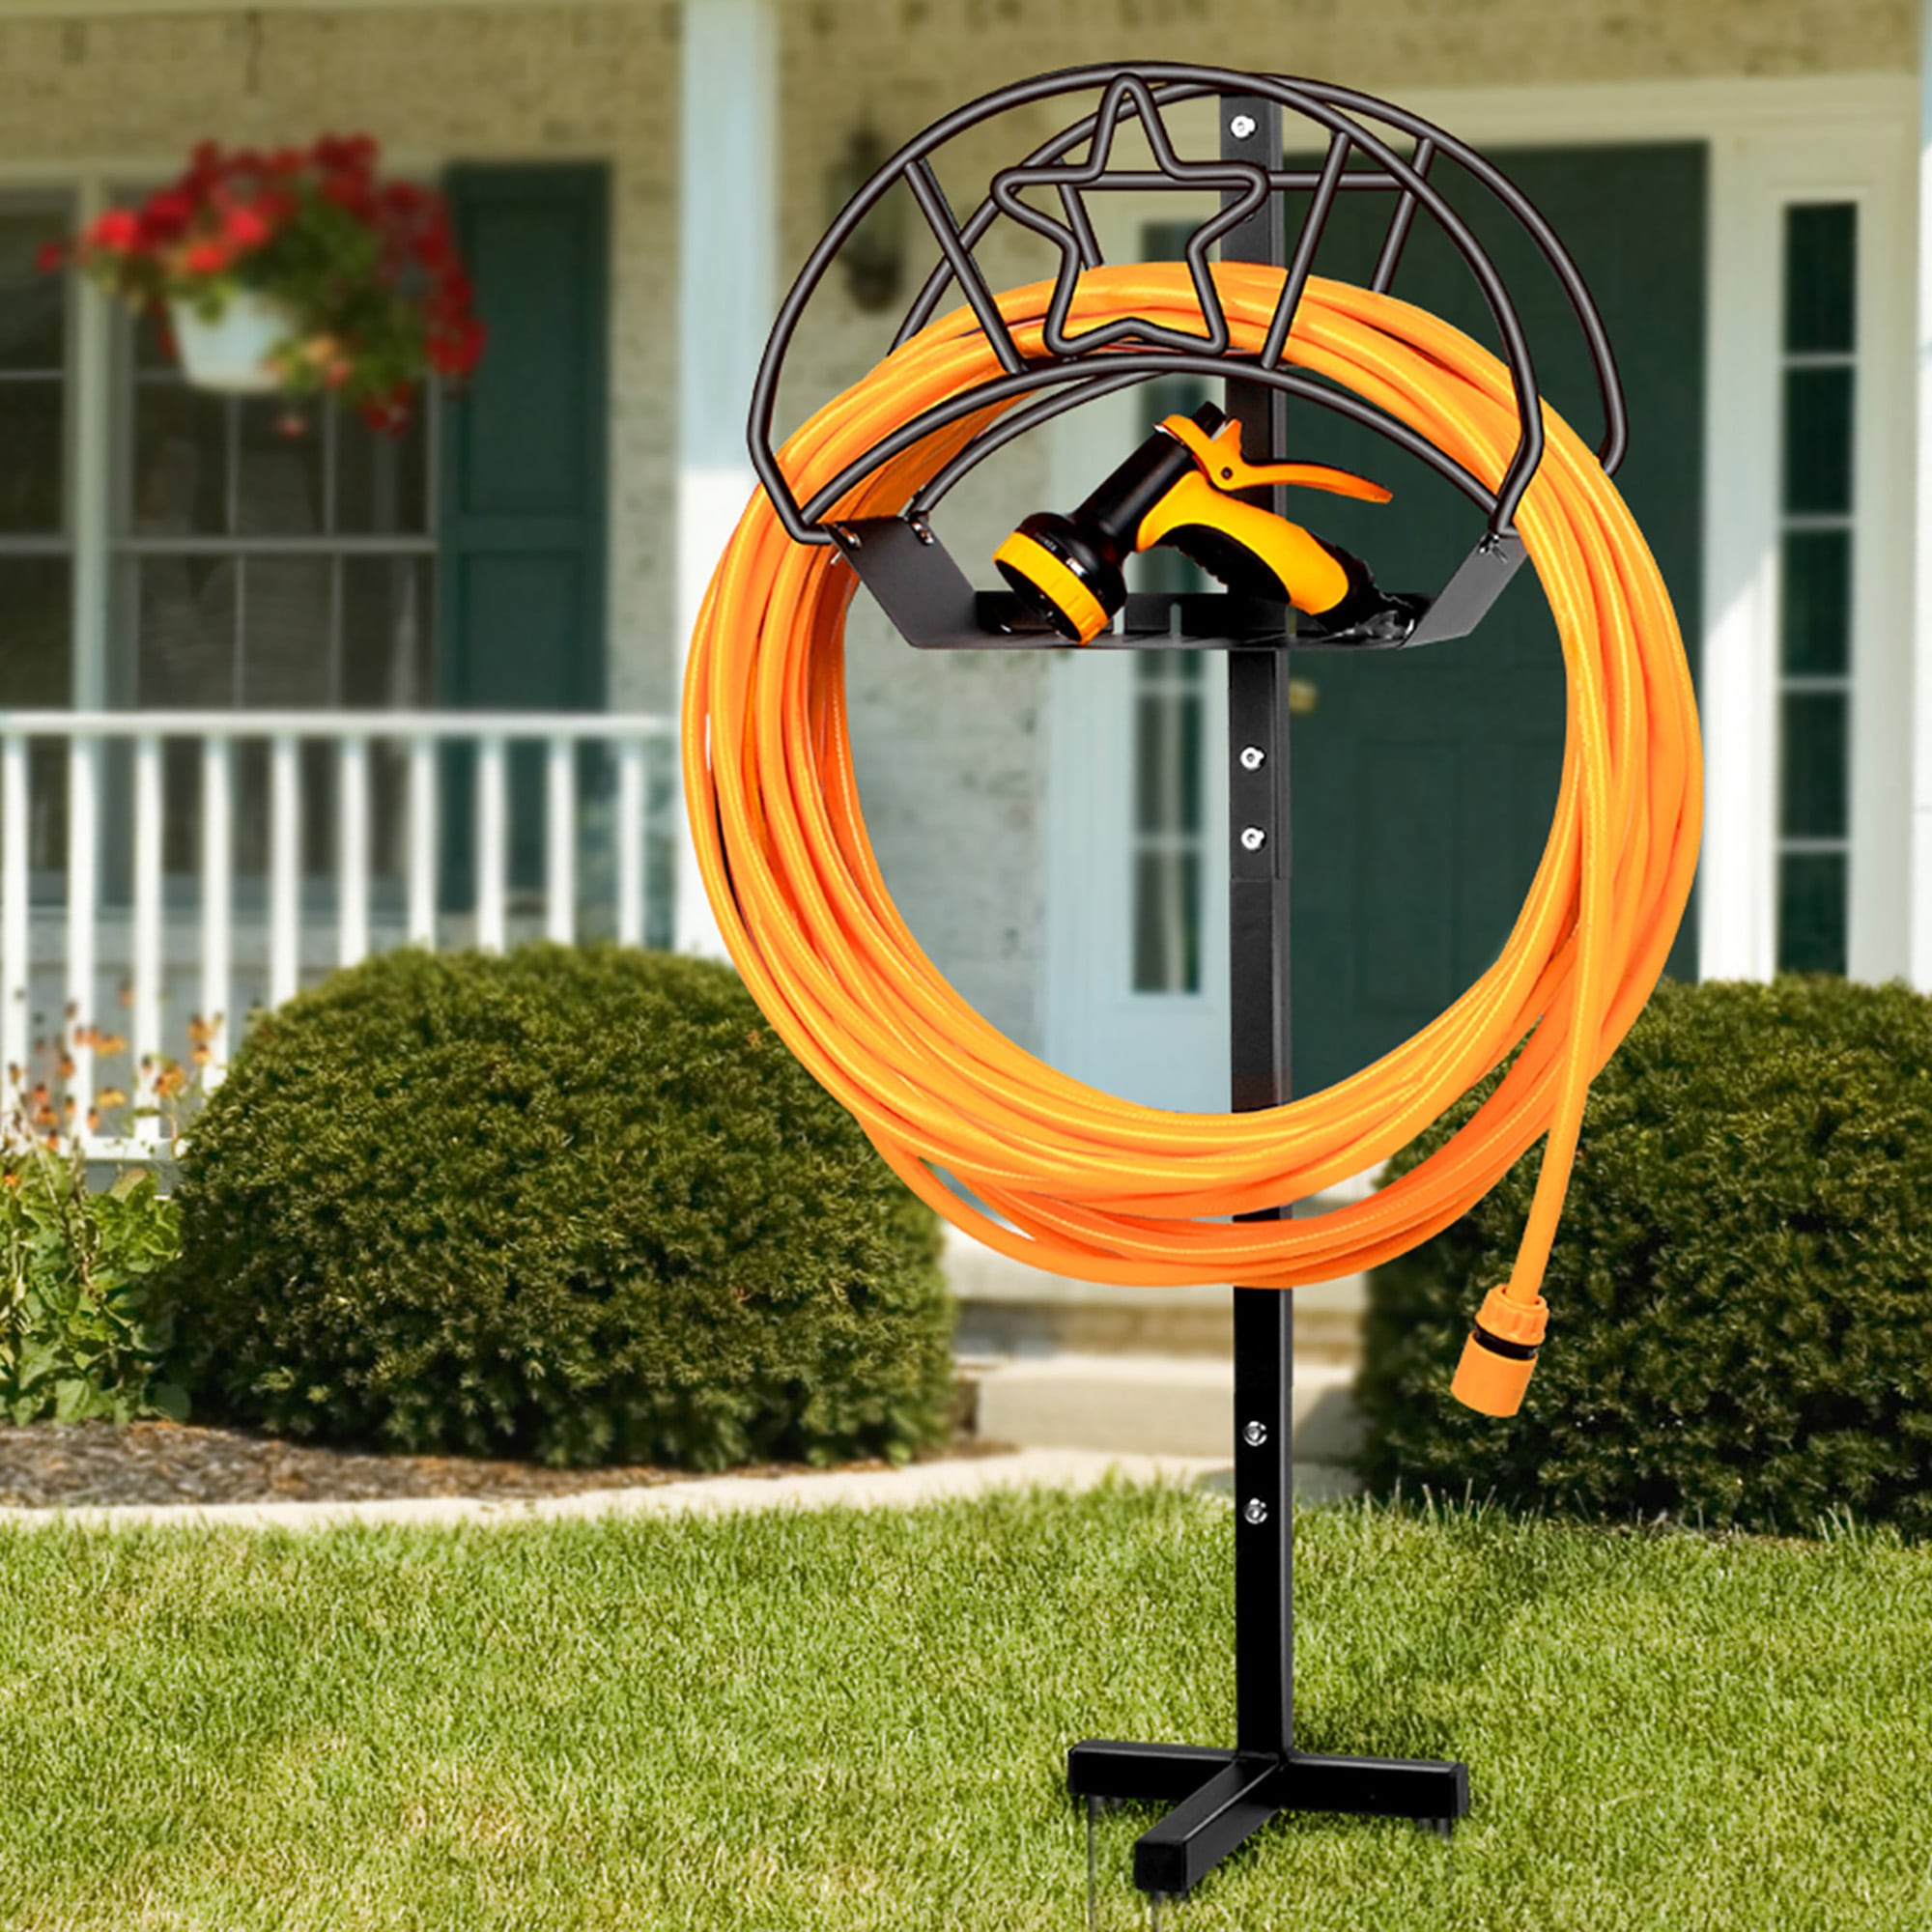 Tip of the Day Wednesday:Hose Reel Stand